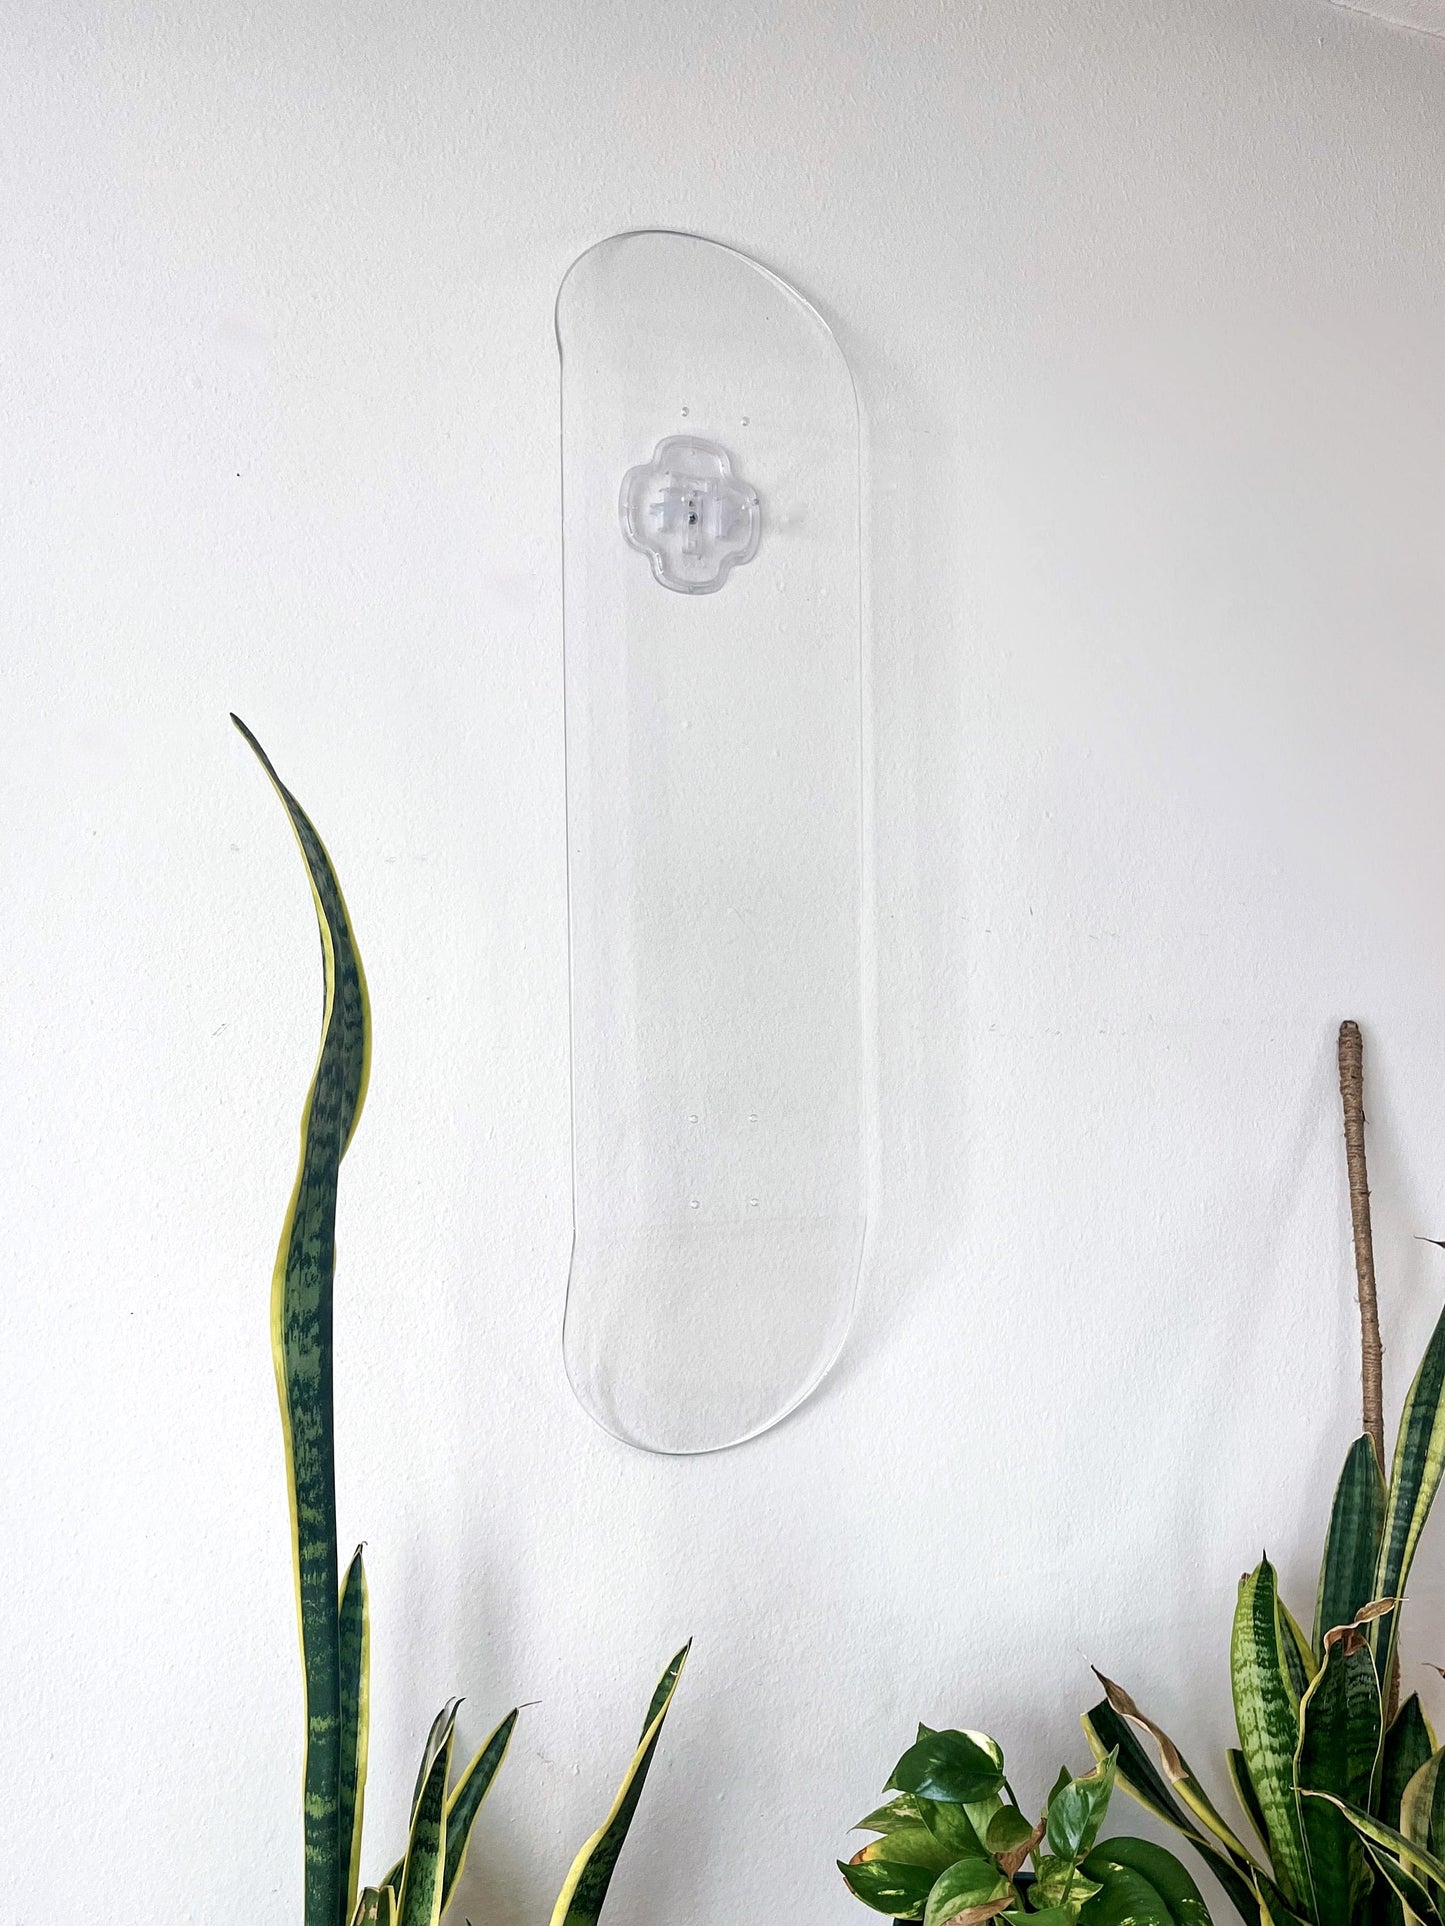 Clear skateboard deck hanging on wall.